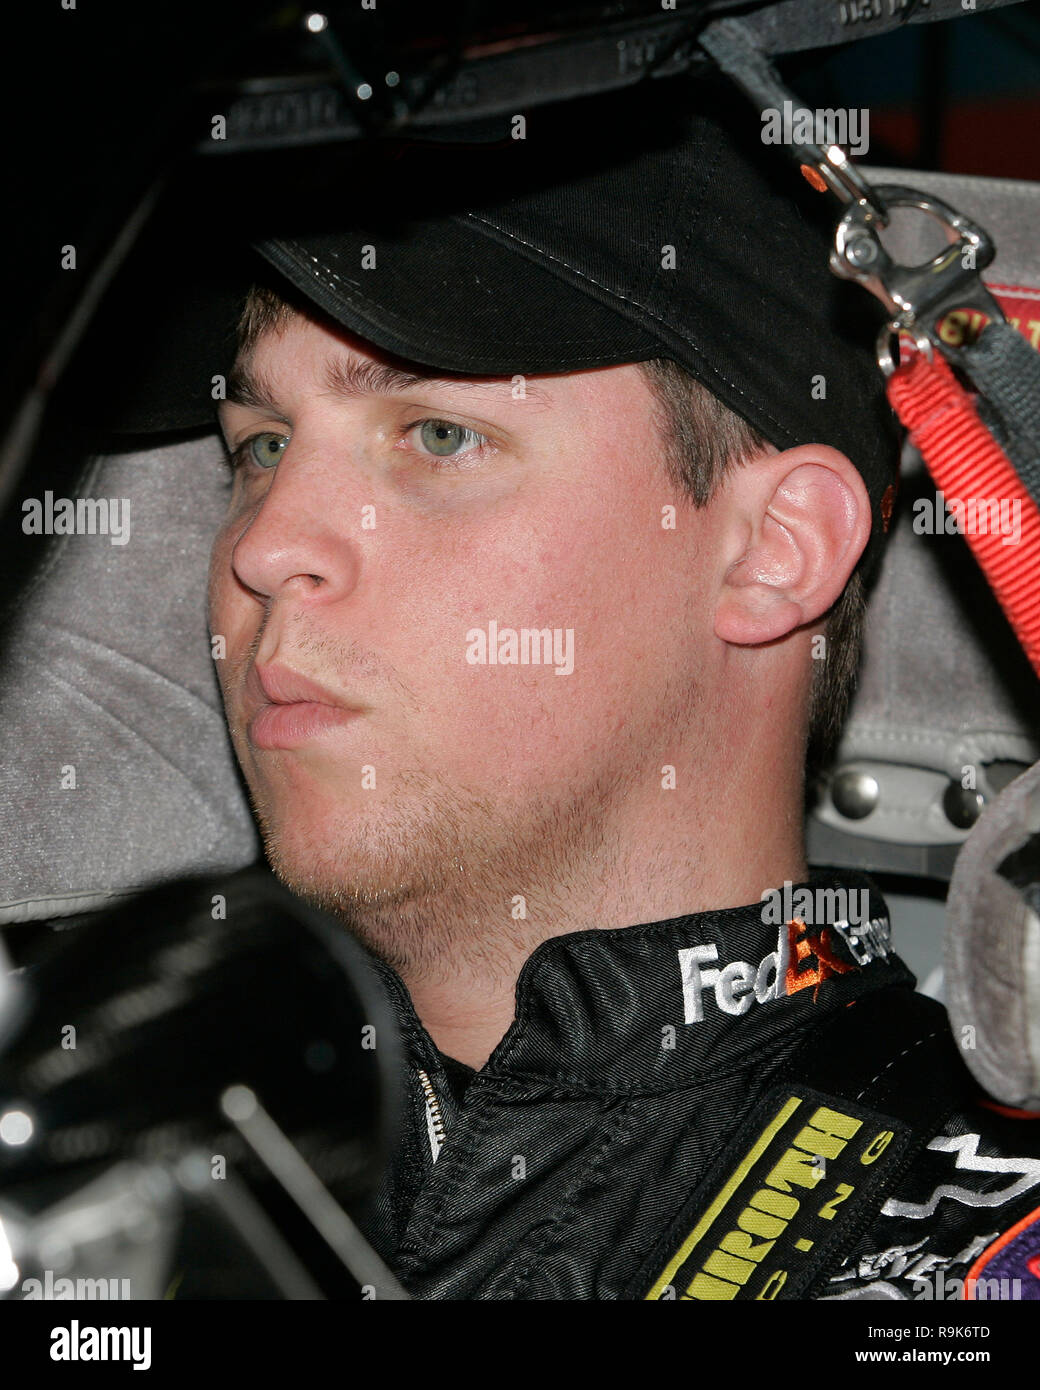 Rookie driver and championship contender Denny Hamlin waits in his car for the Nextel Cup Practice to begin at Homestead-Miami Speedway in Homestead, Florida on November 18, 2006 Stock Photo